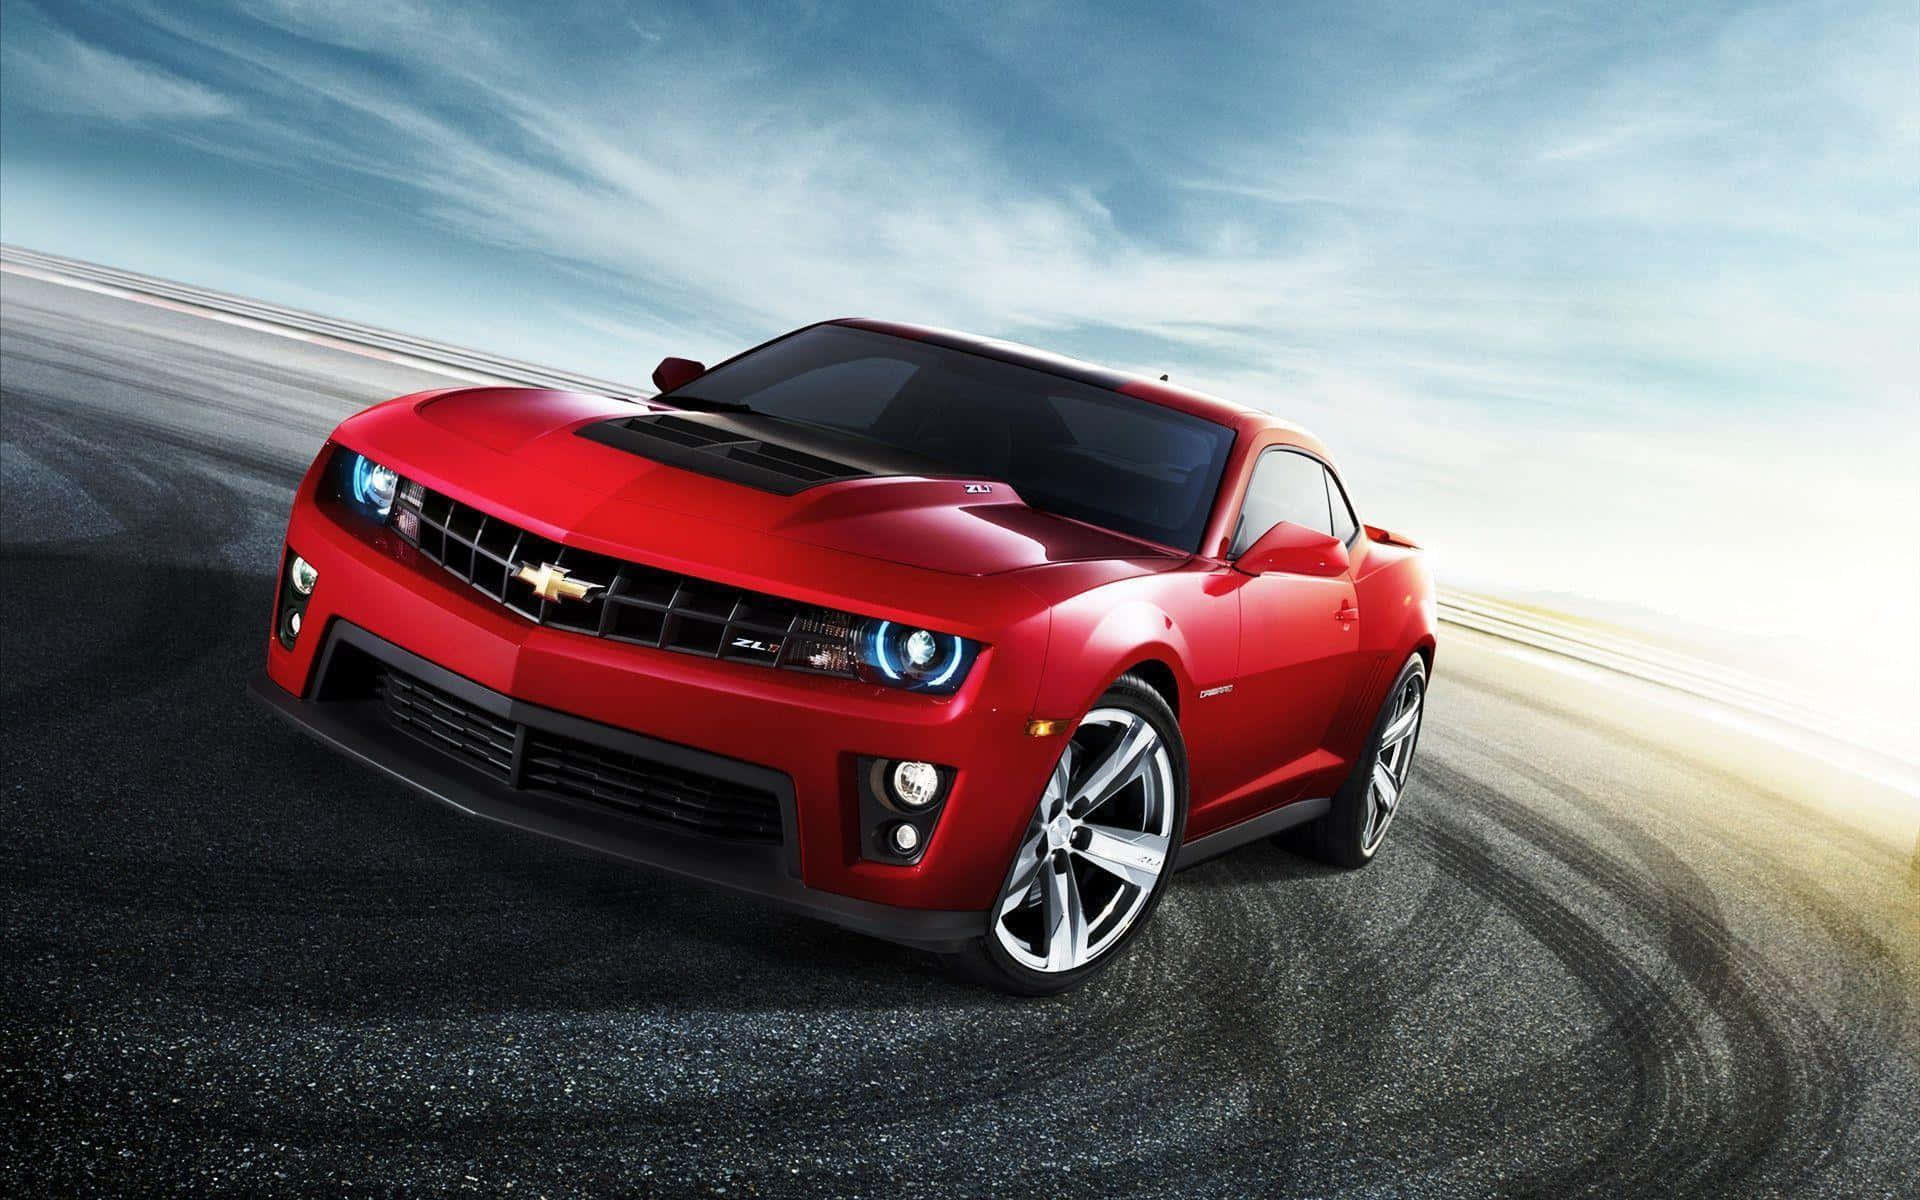 Download Chevy Love wallpaper by Jansingjames  17  Free on ZEDGE now  Browse millions of popular 4x4 Wallpapers an  Chevrolet wallpaper Chevy  Chevrolet sonic